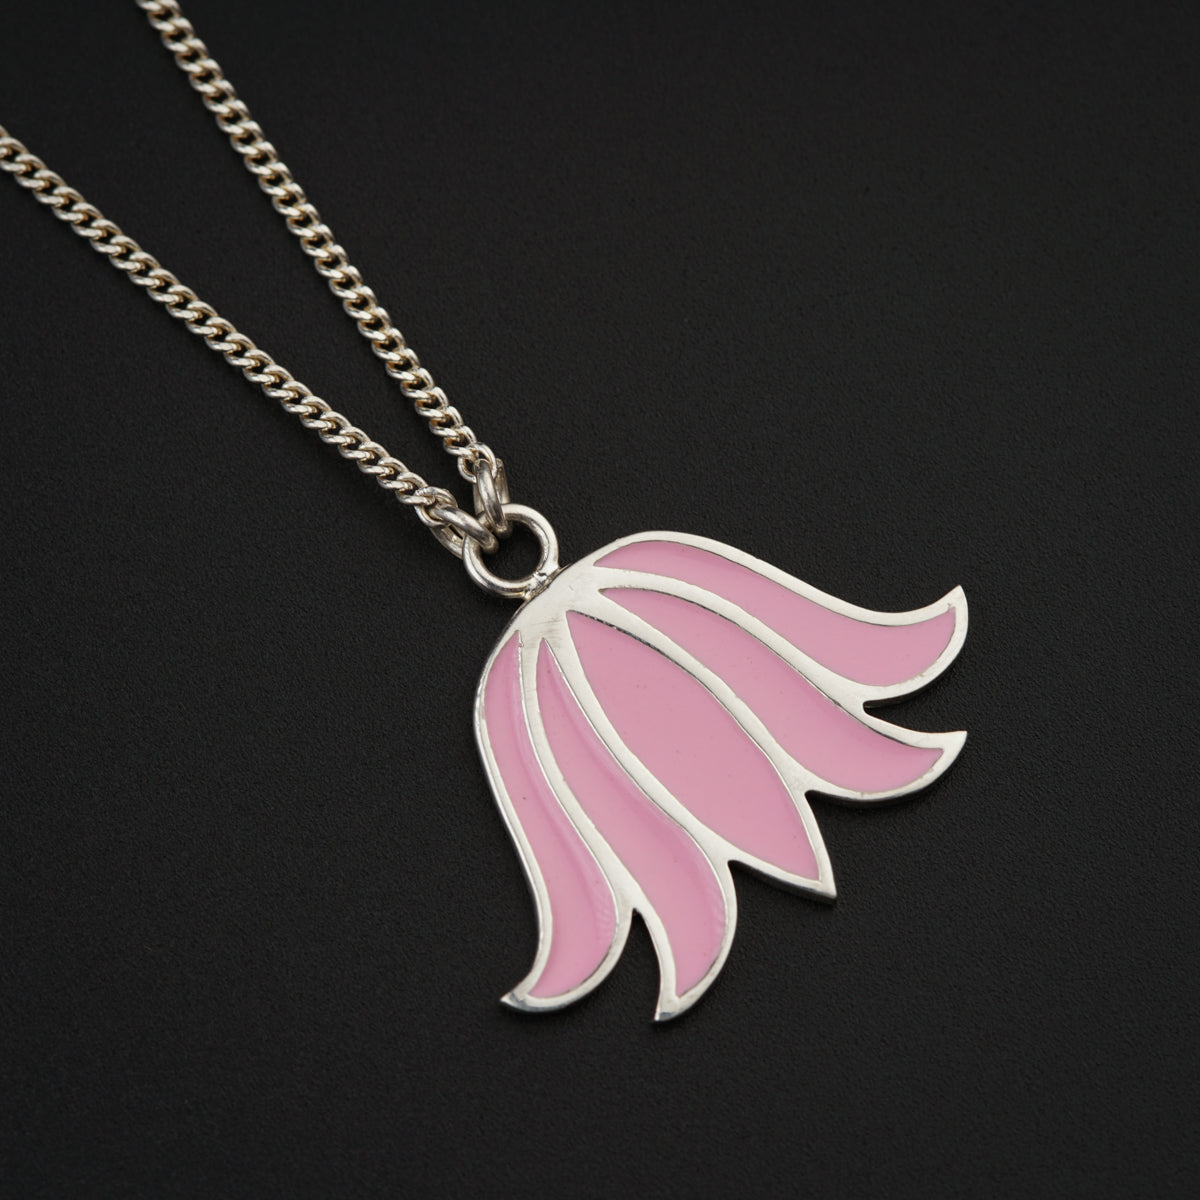 a necklace with a pink flower on a chain